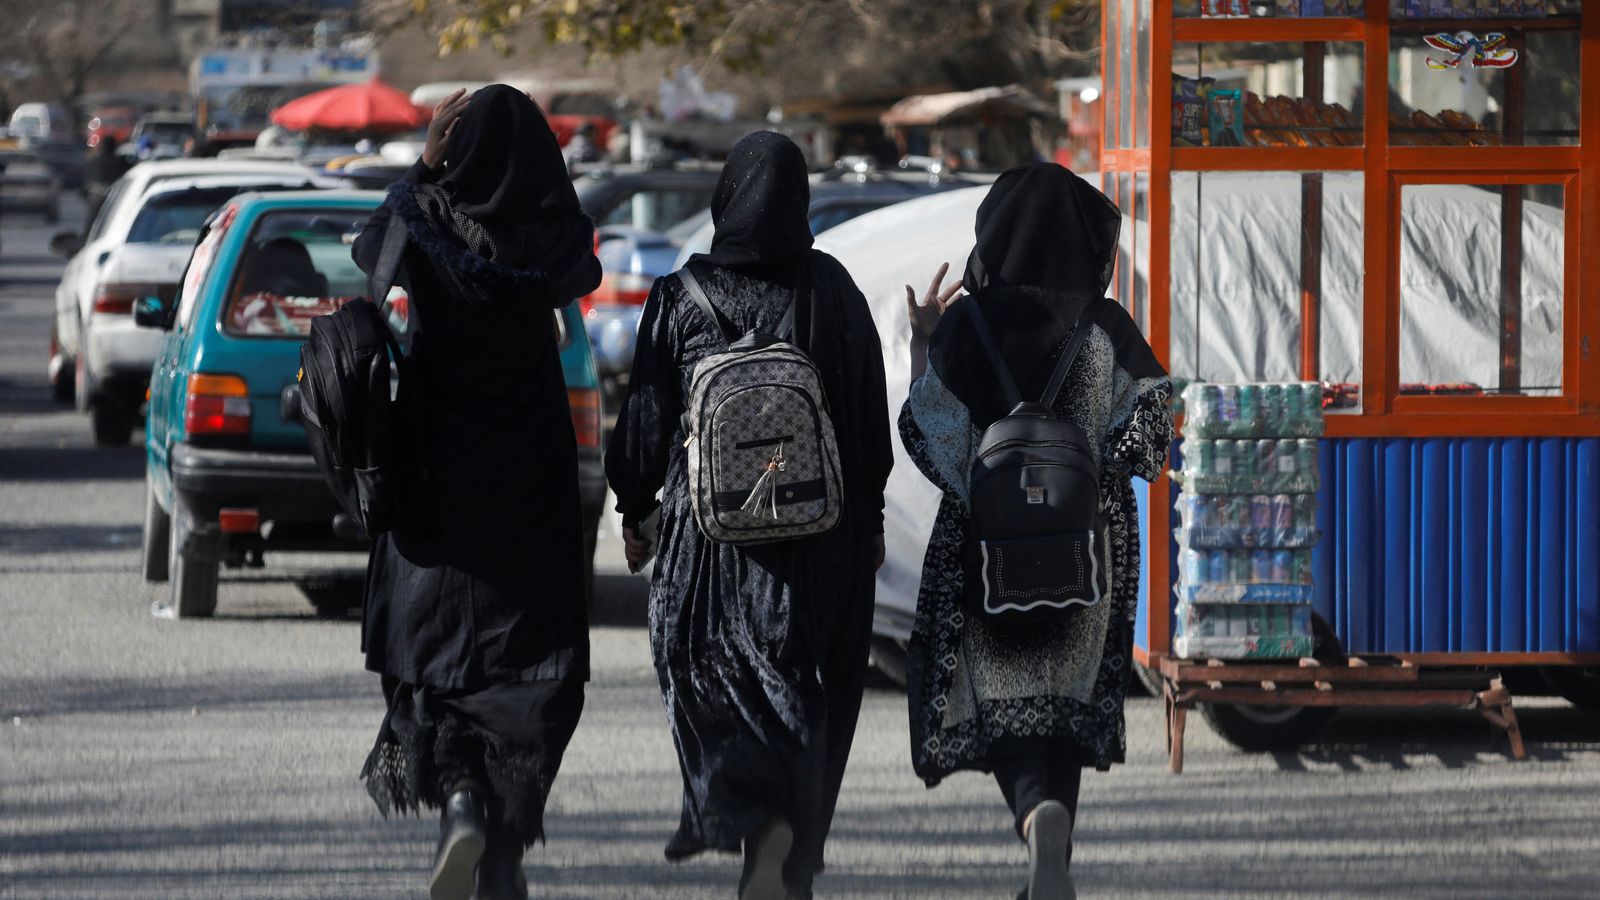 Taliban ban Afghan women from working at NGOs - as UN says its work will be affected